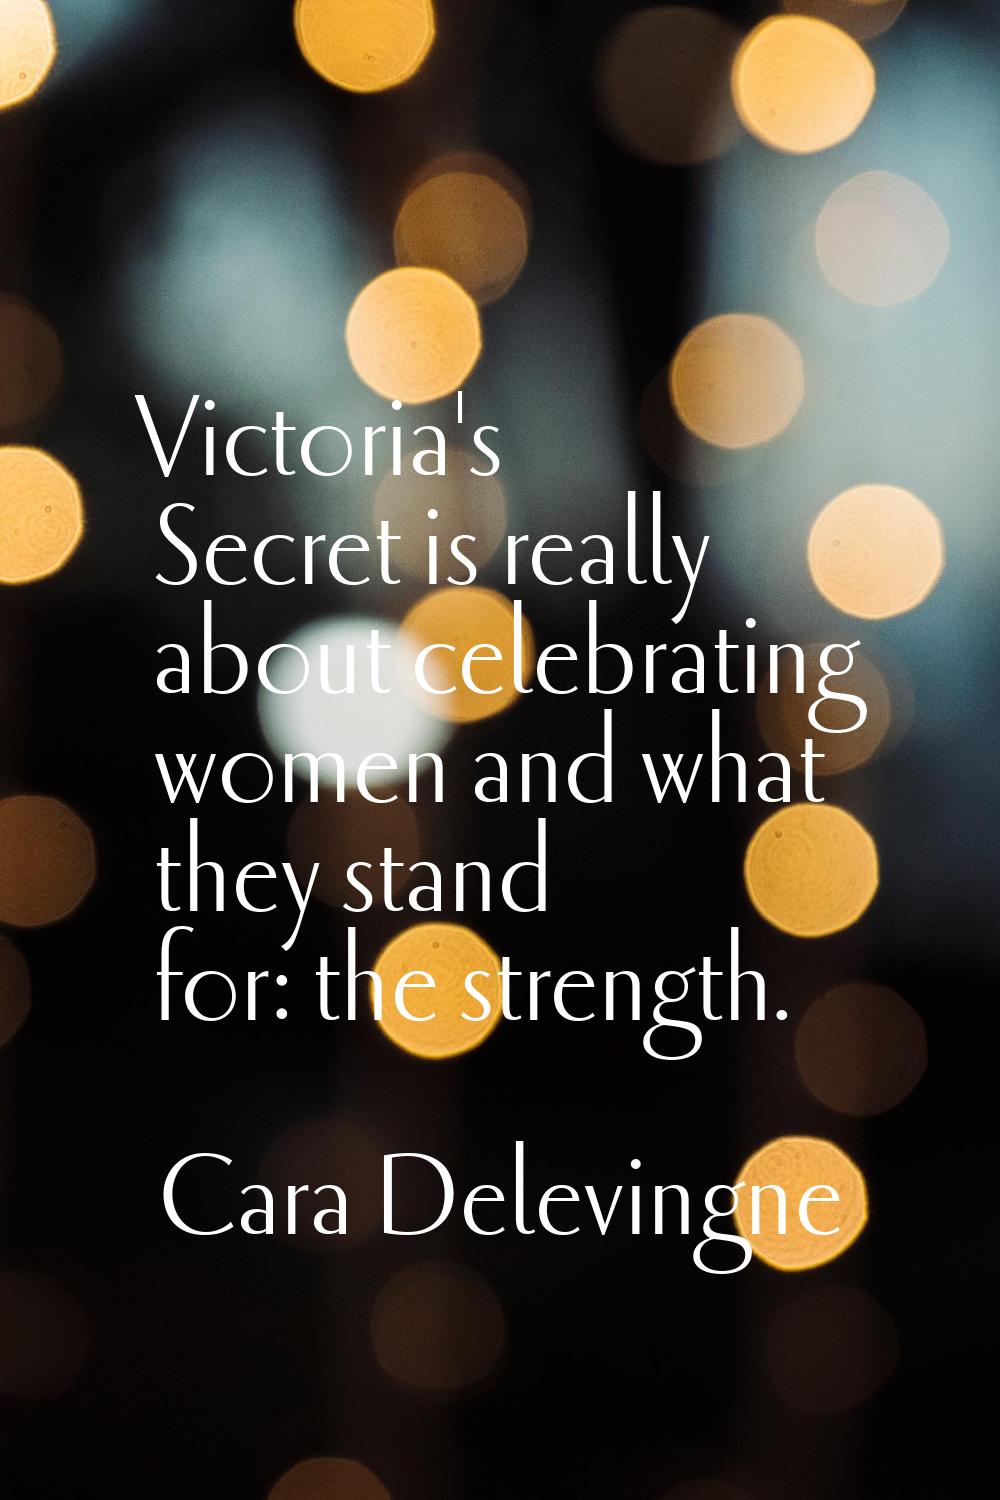 Victoria's Secret is really about celebrating women and what they stand for: the strength.